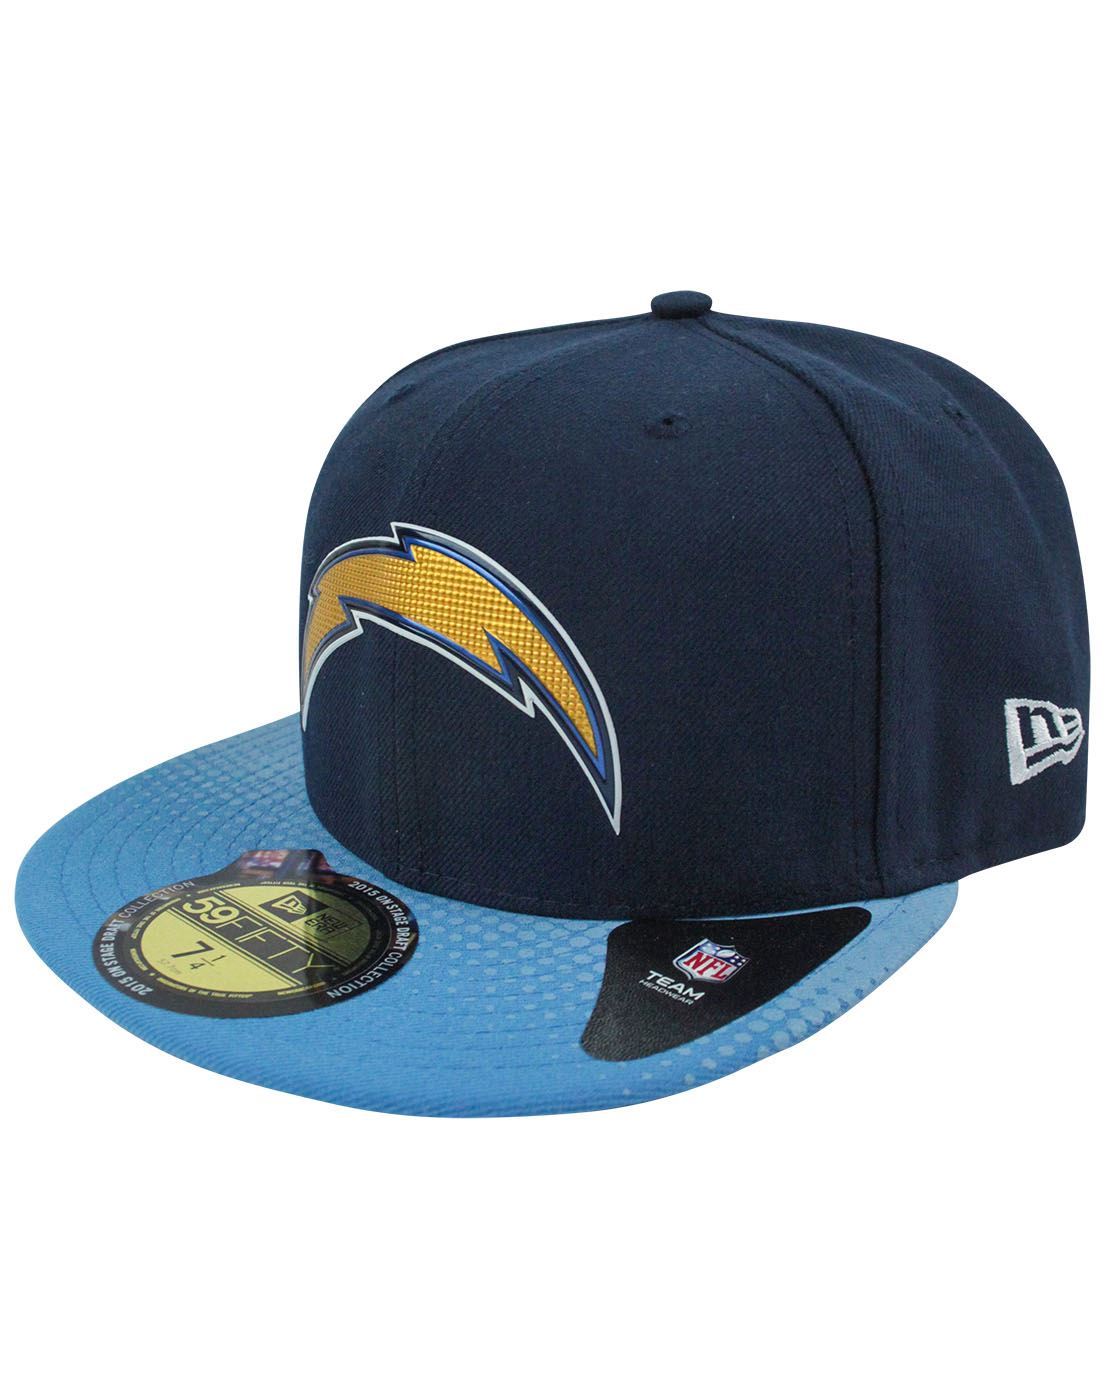 san diego chargers hat